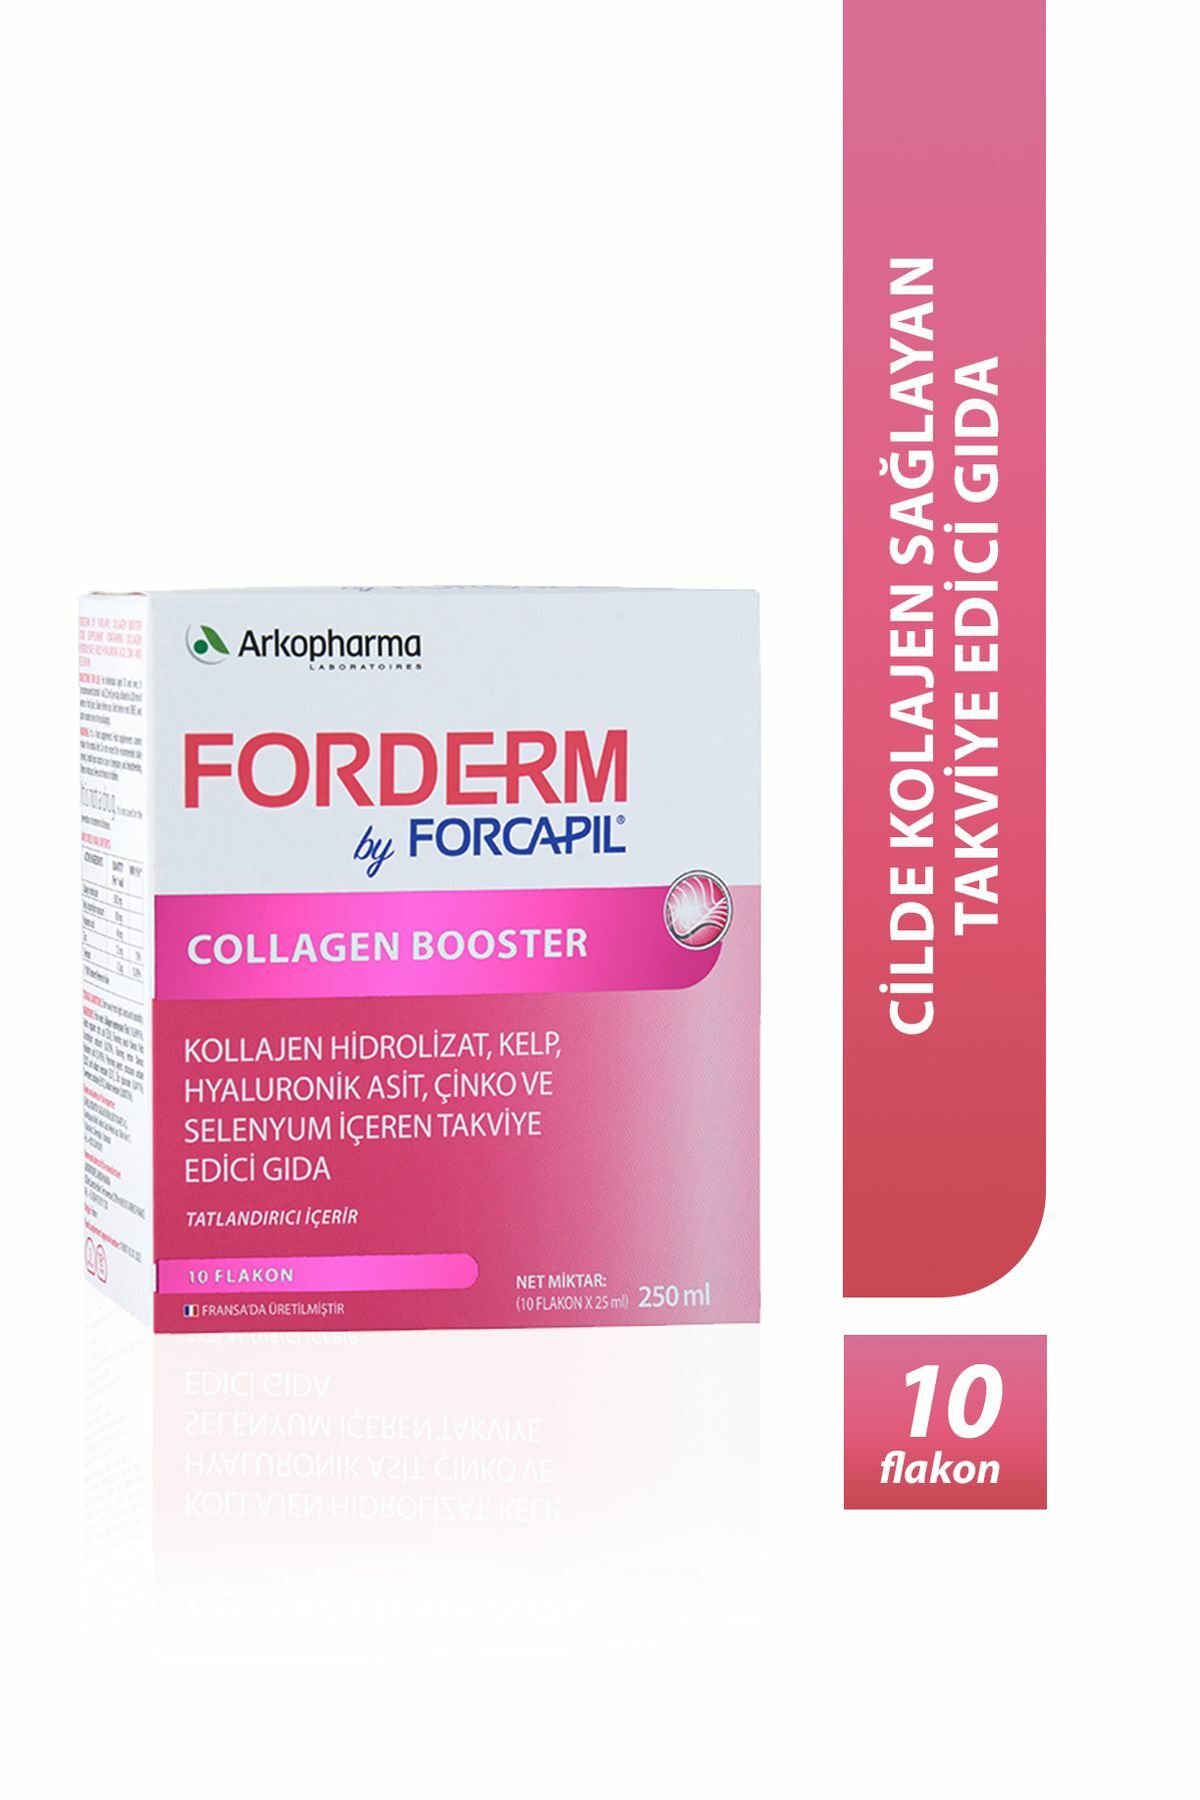 Forderm by Forcapil® Collagen Booster